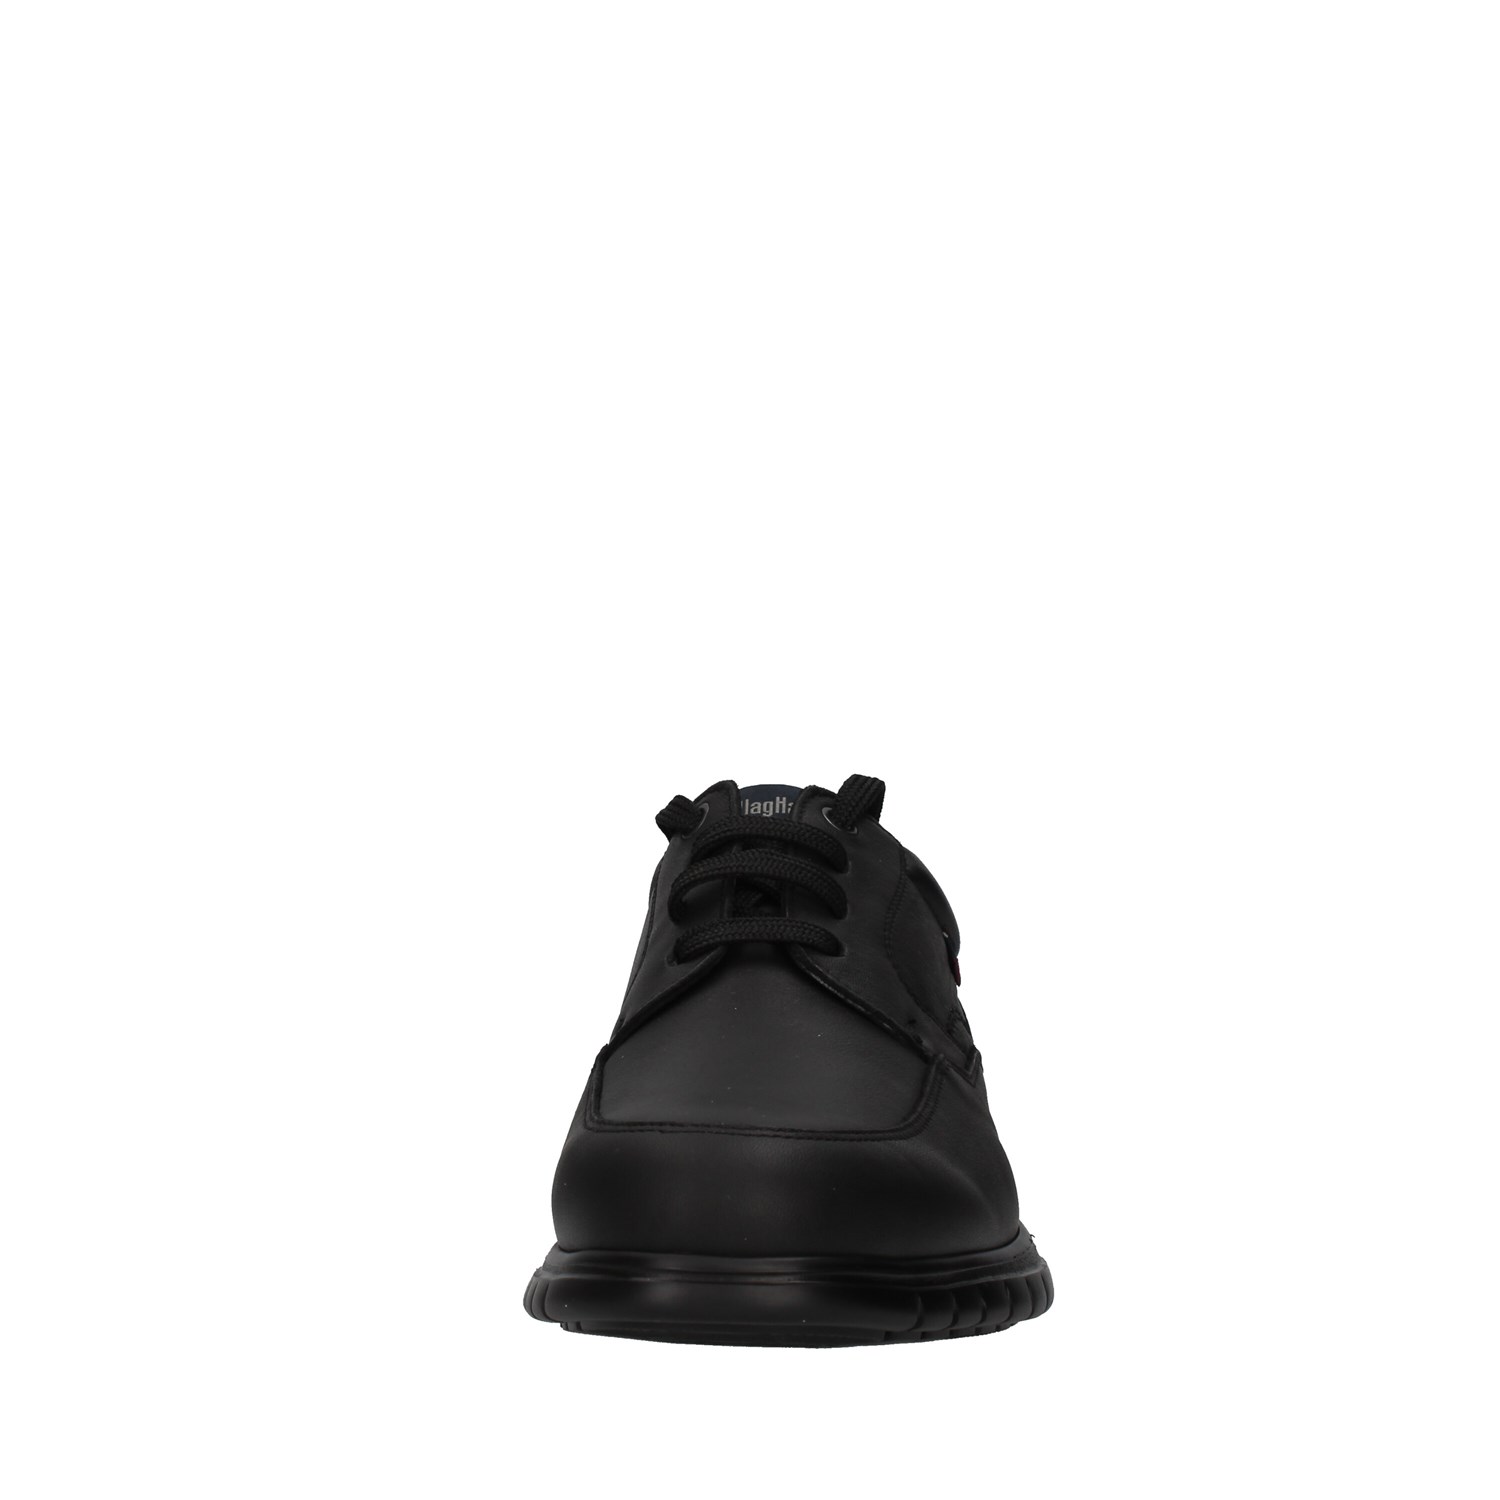 Callaghan Shoes Man With wedge BLACK 12700